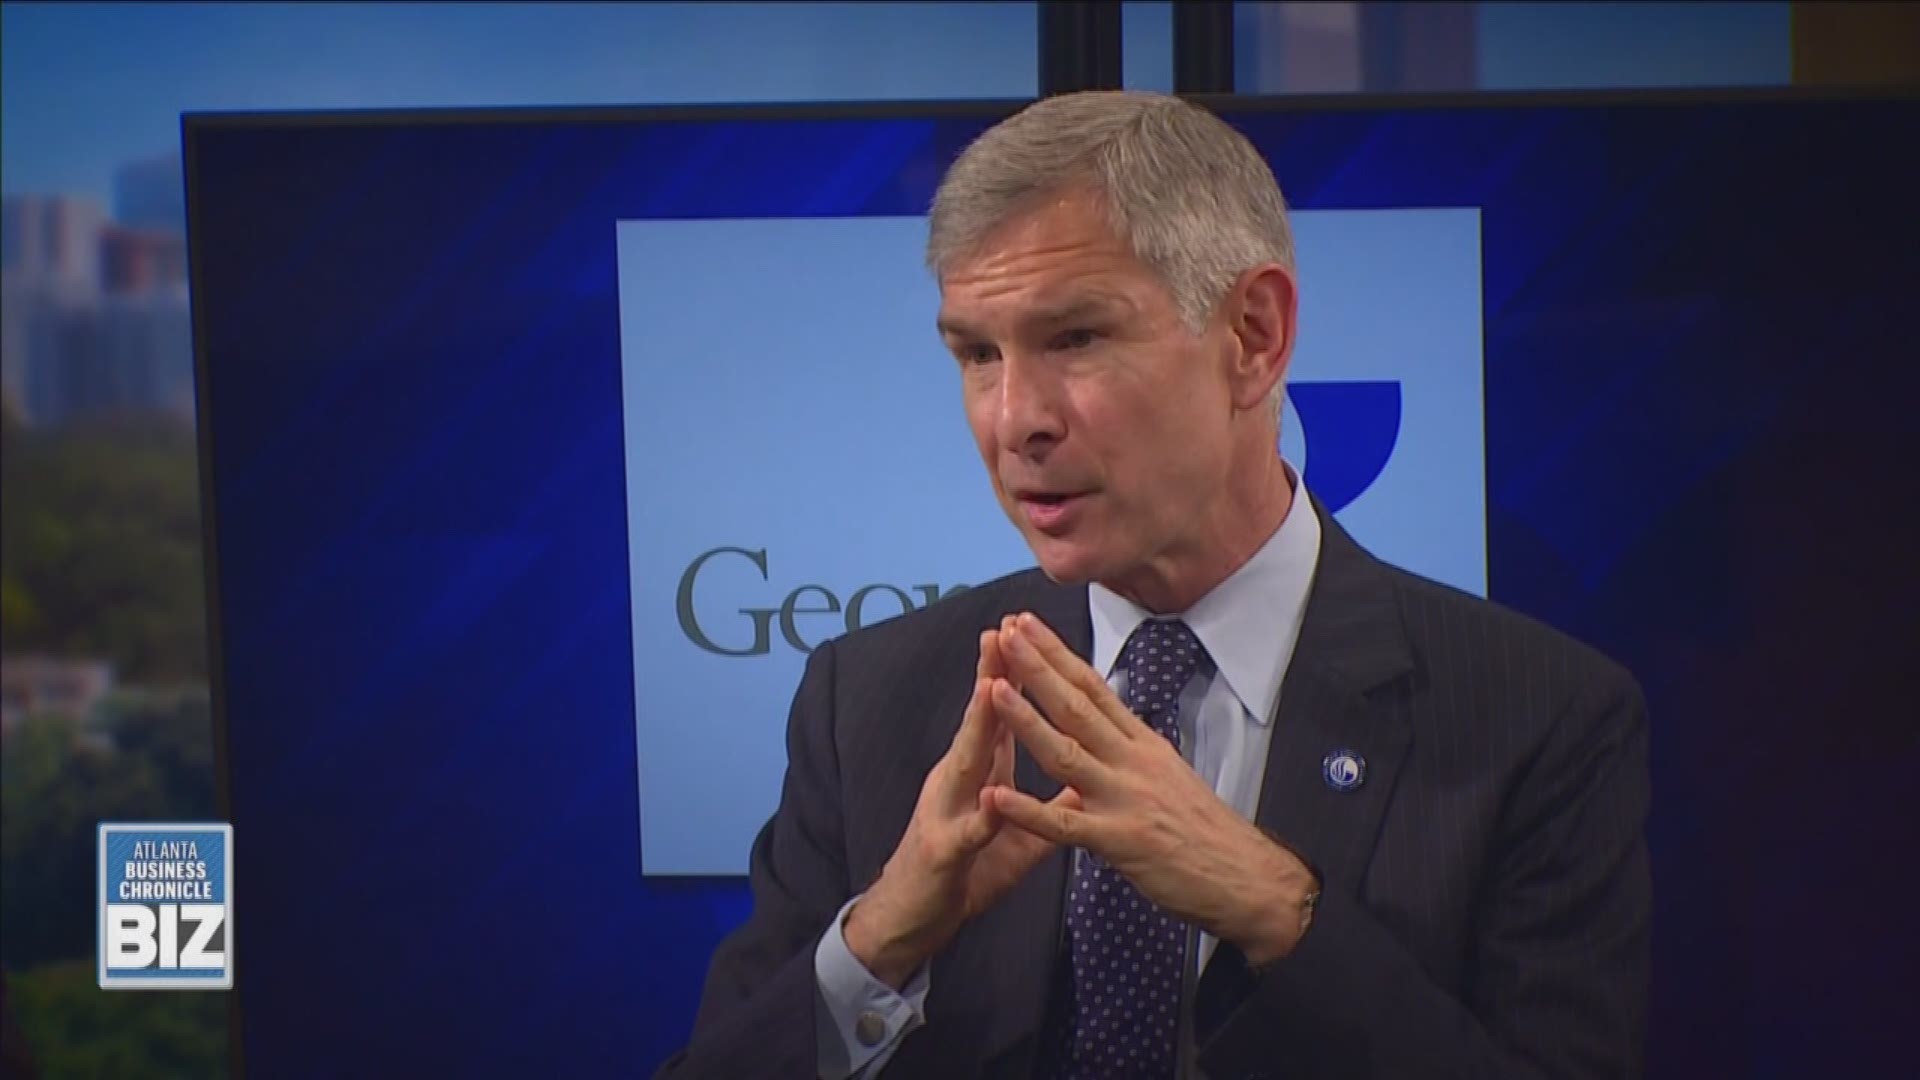 Georgia State University President Mark Becker sits down with David Rubinger and talks about GSU's growing impact on 'Atlanta Business Chronicle's BIZ'